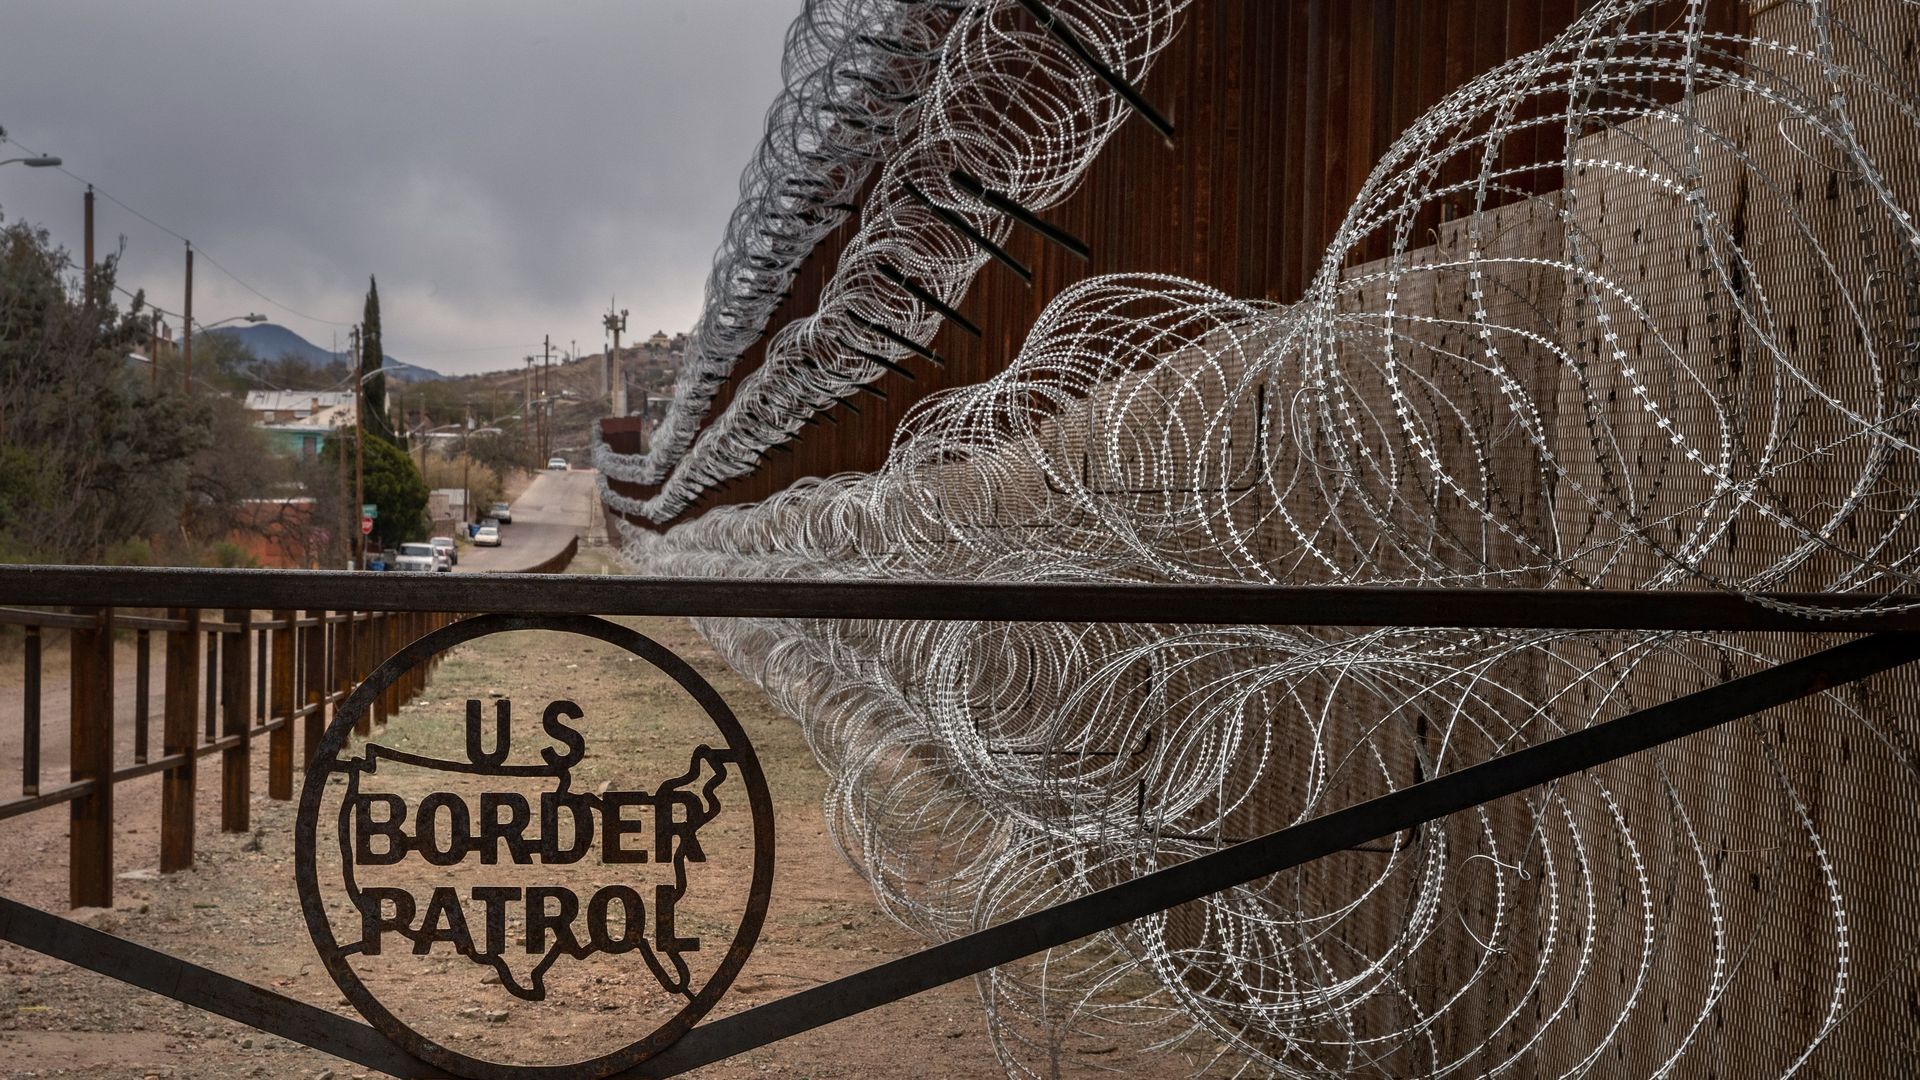 A metal fence marked with the US Border Patrol sign prevents people to get close to the barbed/concertina wire covering the US/Mexico border fence, in Nogales, Arizona, on February 9, 2019.